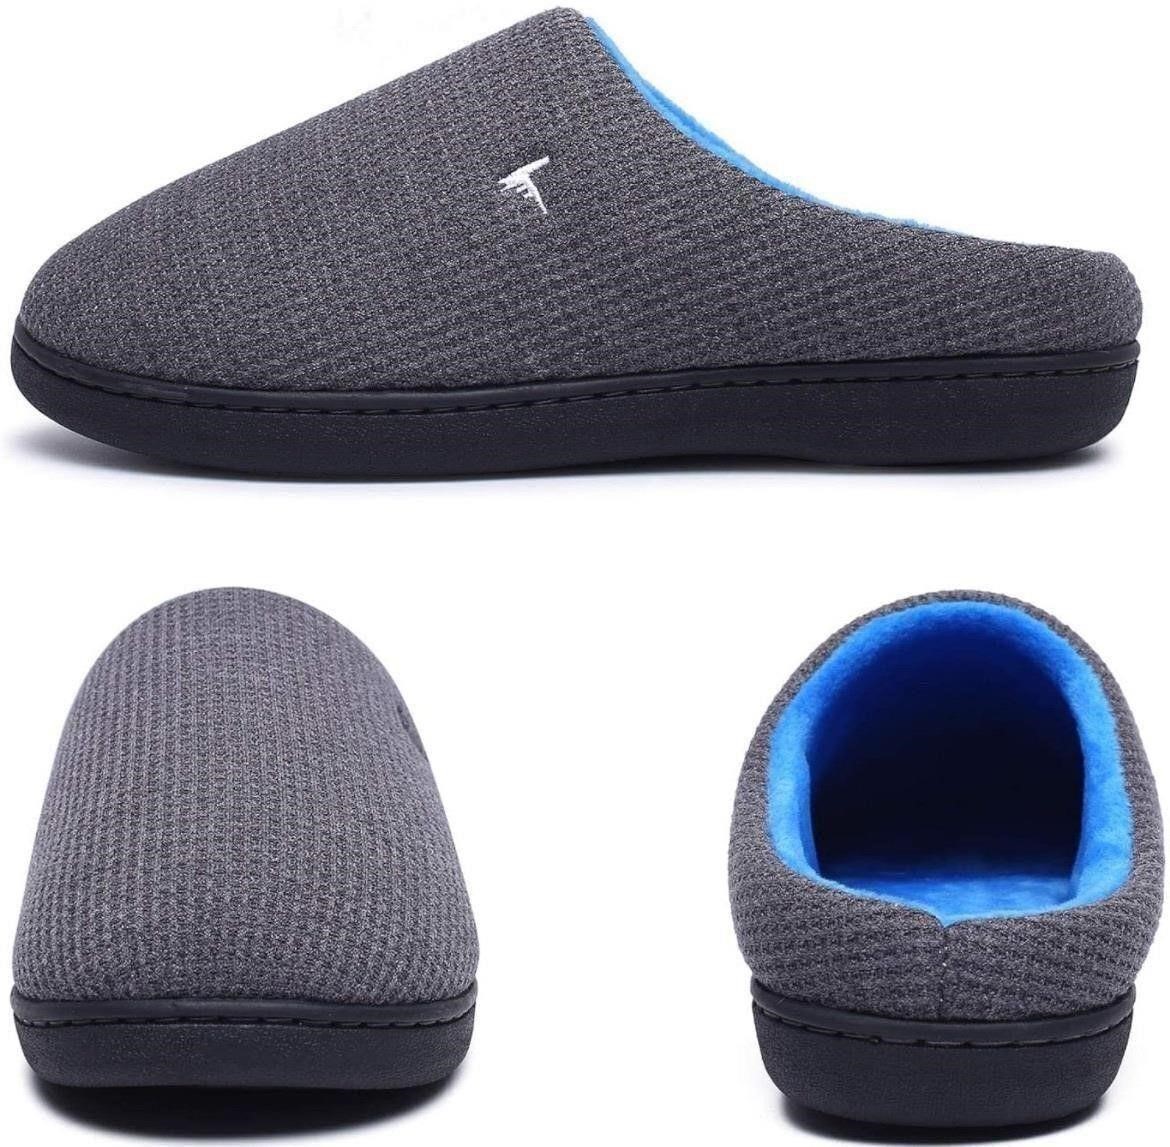 NEW-9.5 /42-43 Size Mens Womens Comfort Slippers